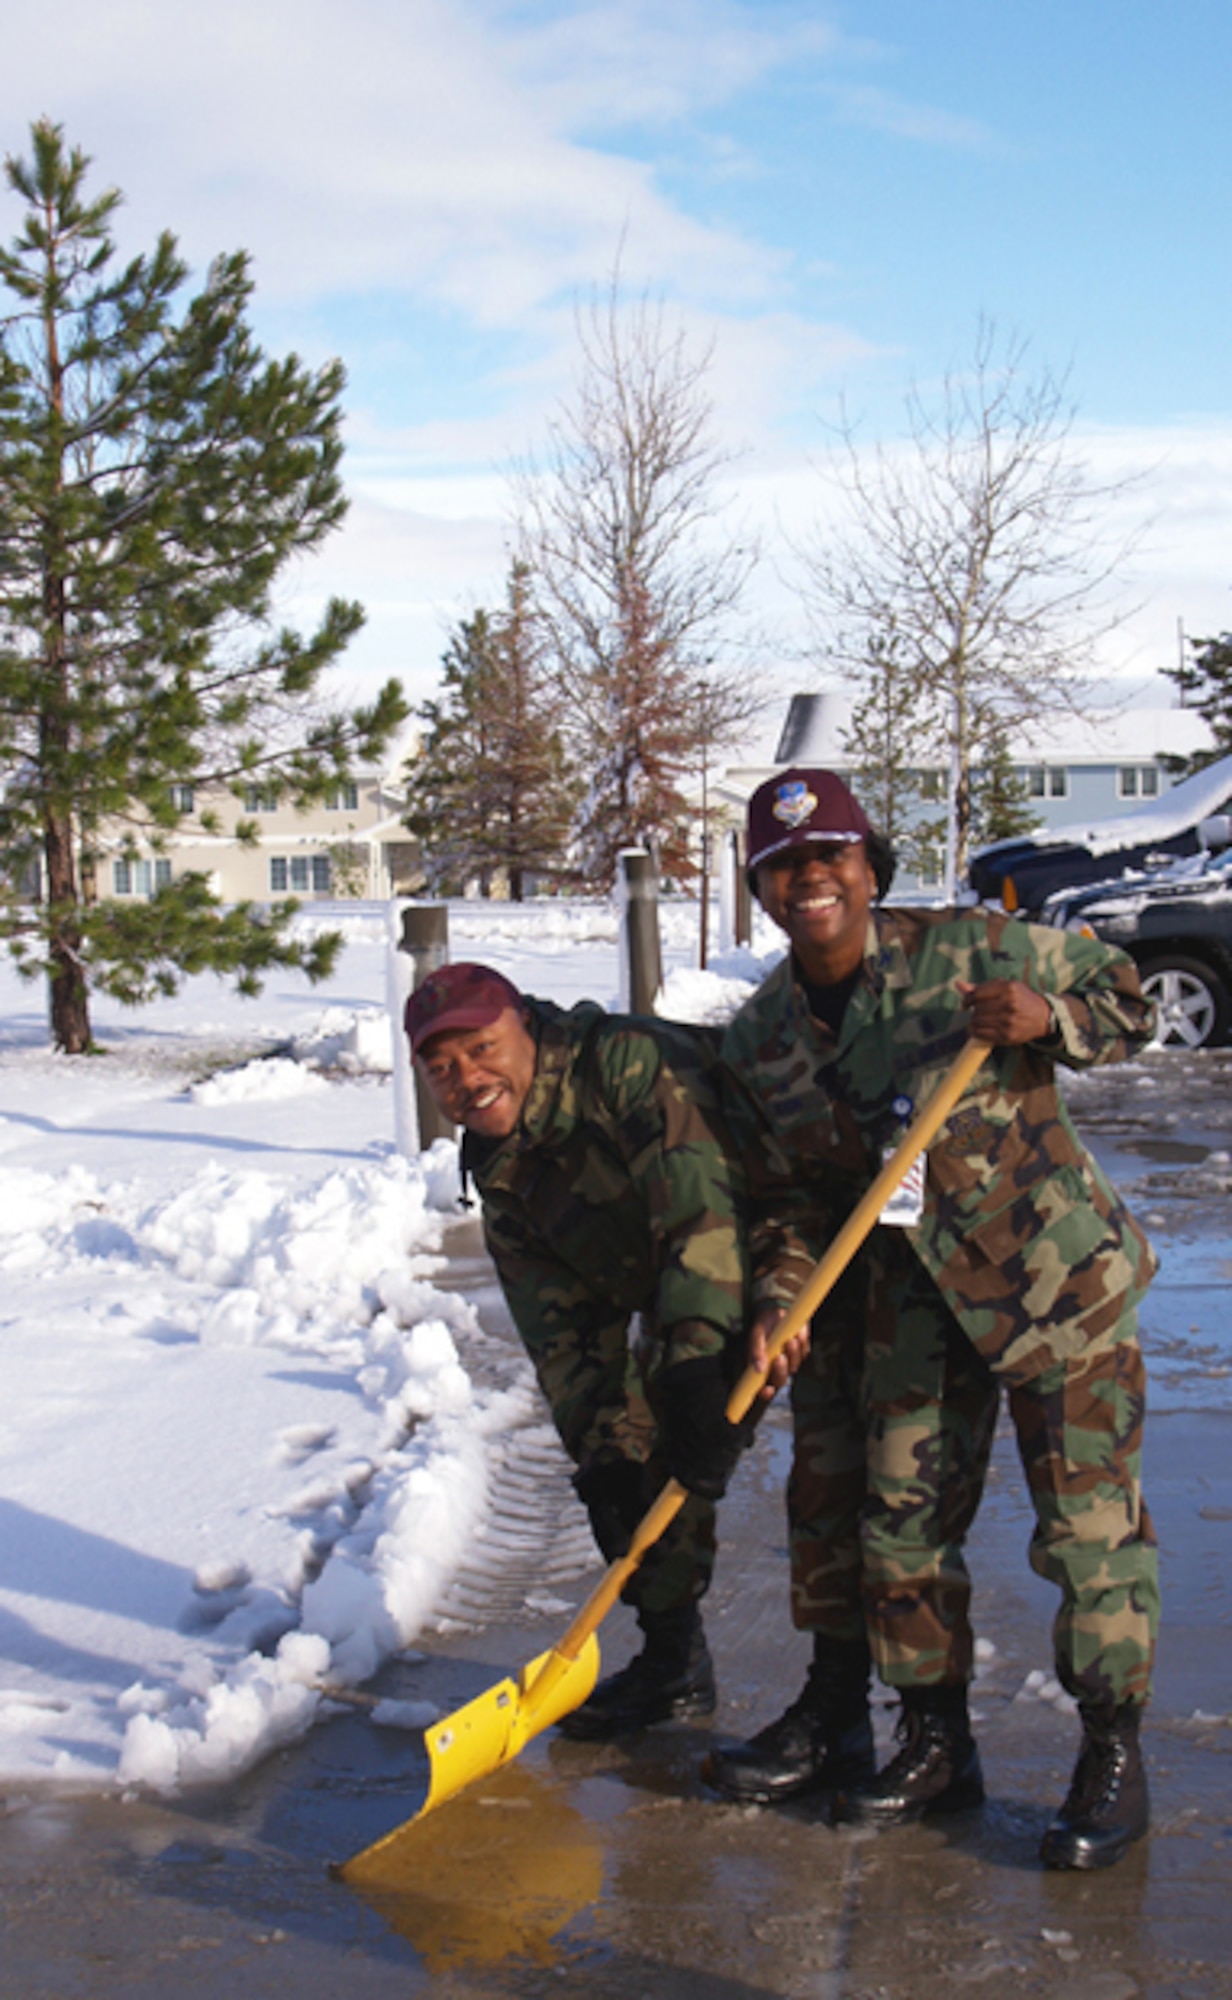 Col. Leslie Dixon, 341st Medical Group commander, and Master Sgt. Melvin Skyes, 341st Medical Support Squadron, shovel  outside the clinic after being surprised with a snowstorm June 11. (Courtesy photo)